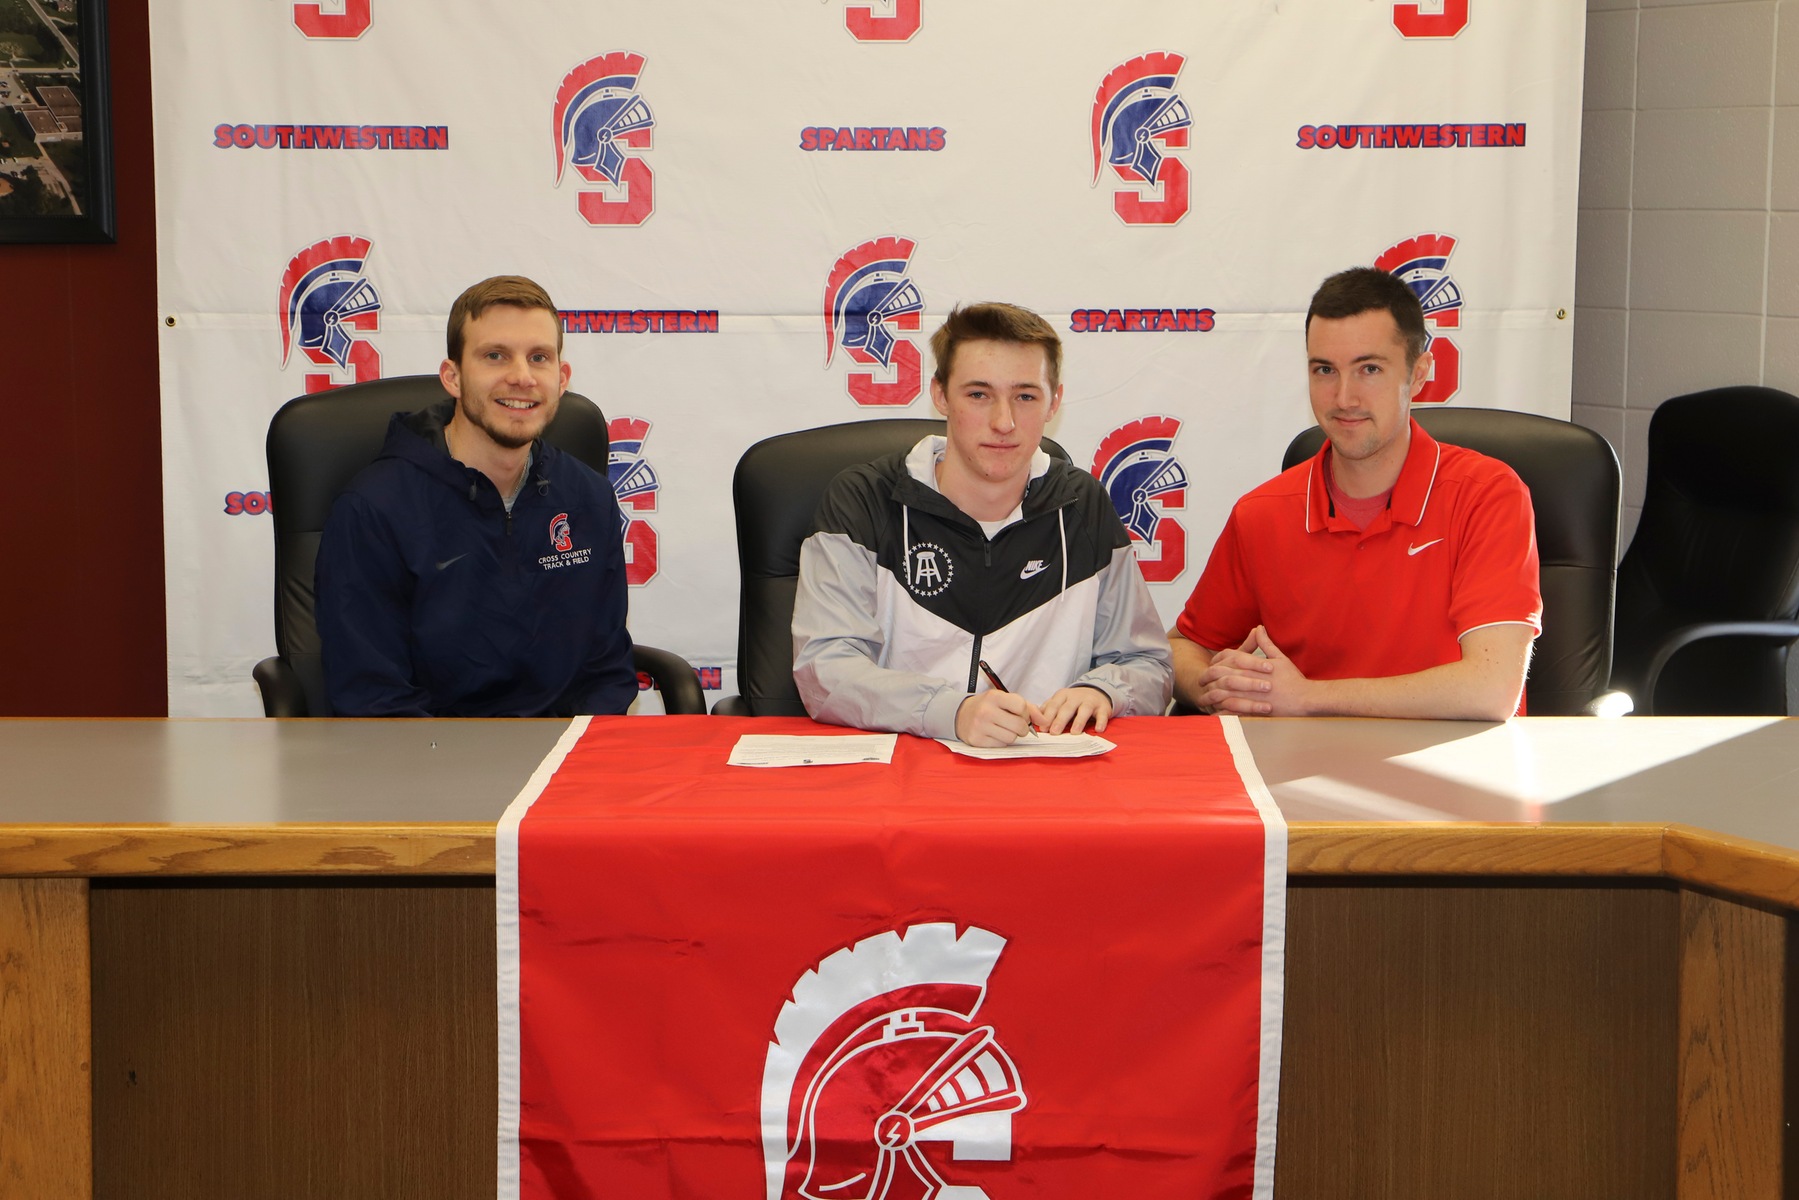 Central Decatur's Kolten Johnson signs his letter of intent with Southwestern for the 2019-20 track and field season.